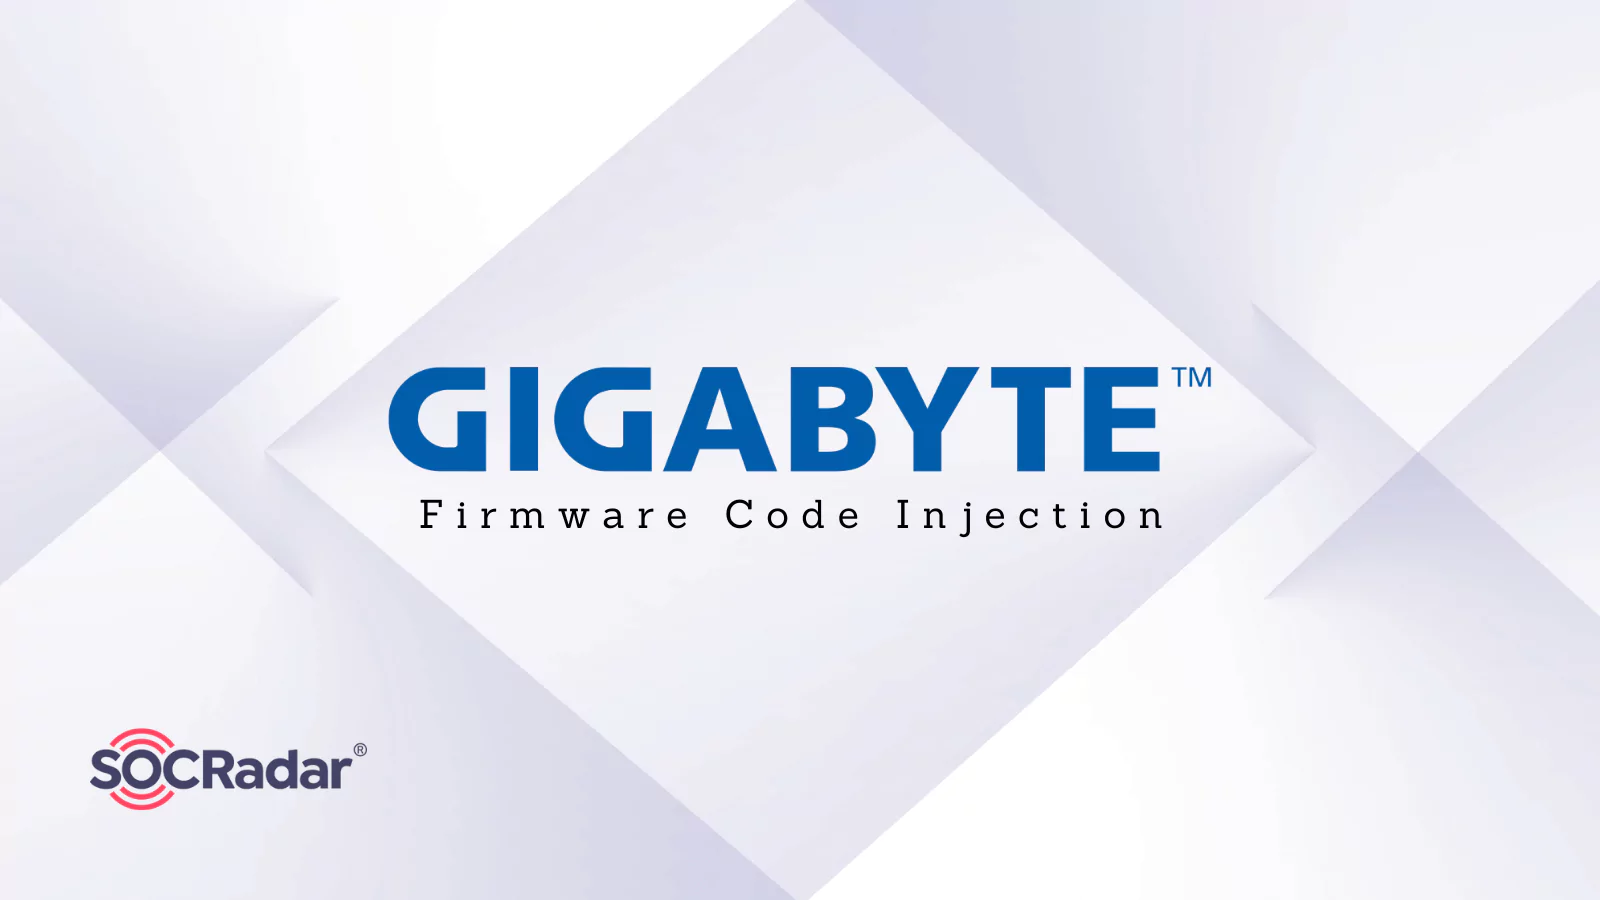 SOCRadar® Cyber Intelligence Inc. | Gigabyte Firmware Code Injection: Persistent Backdoor Leads to Supply Chain Risks